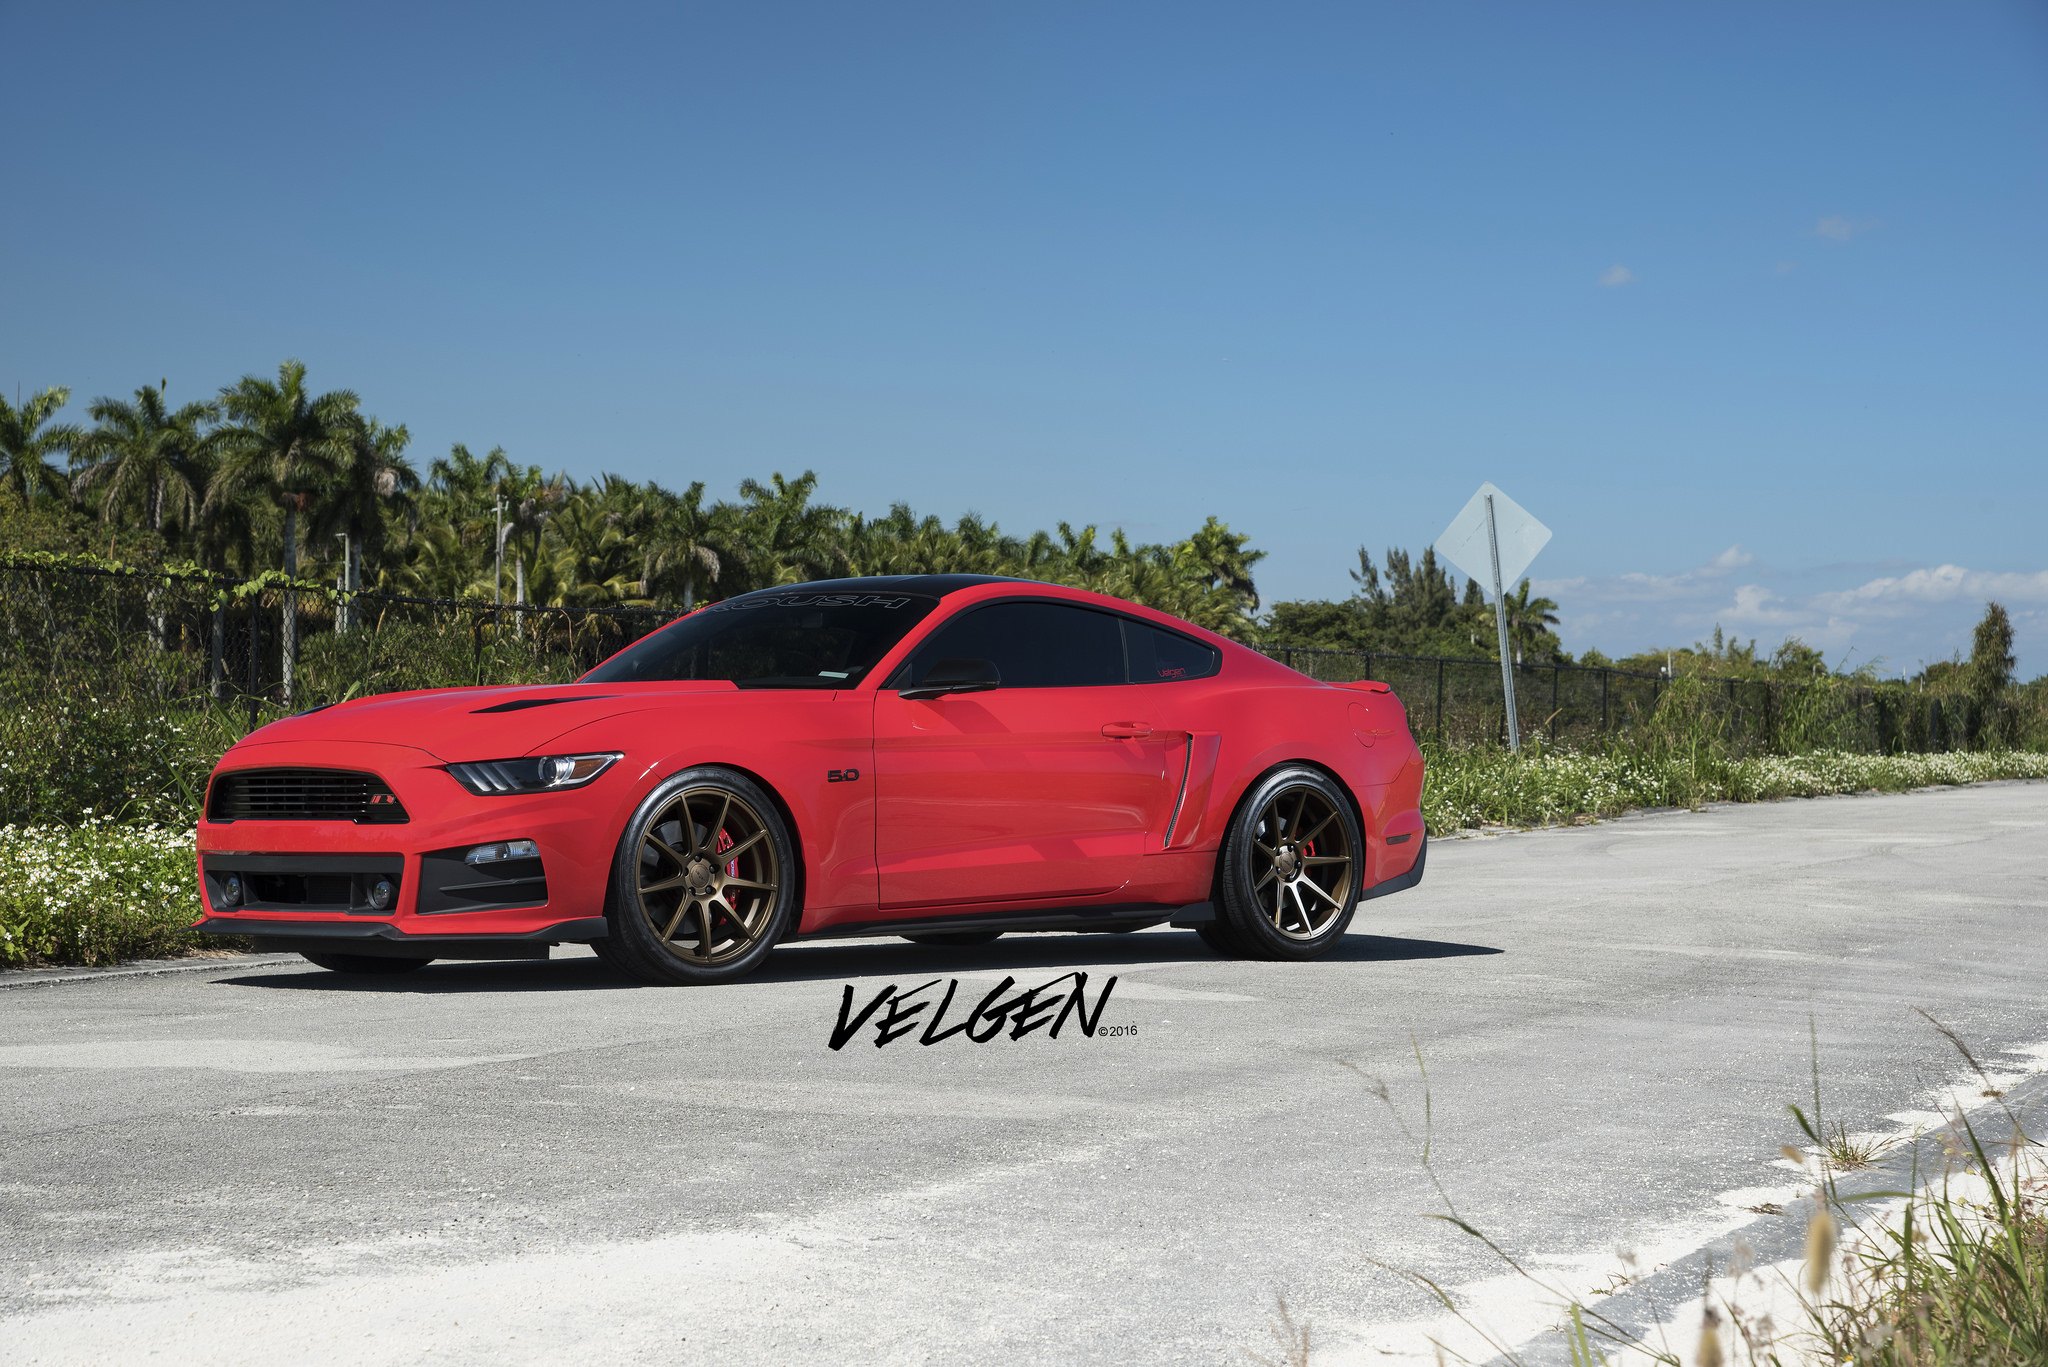 Red Ford Mustang With Black Roush Grille - Photo by Velgen